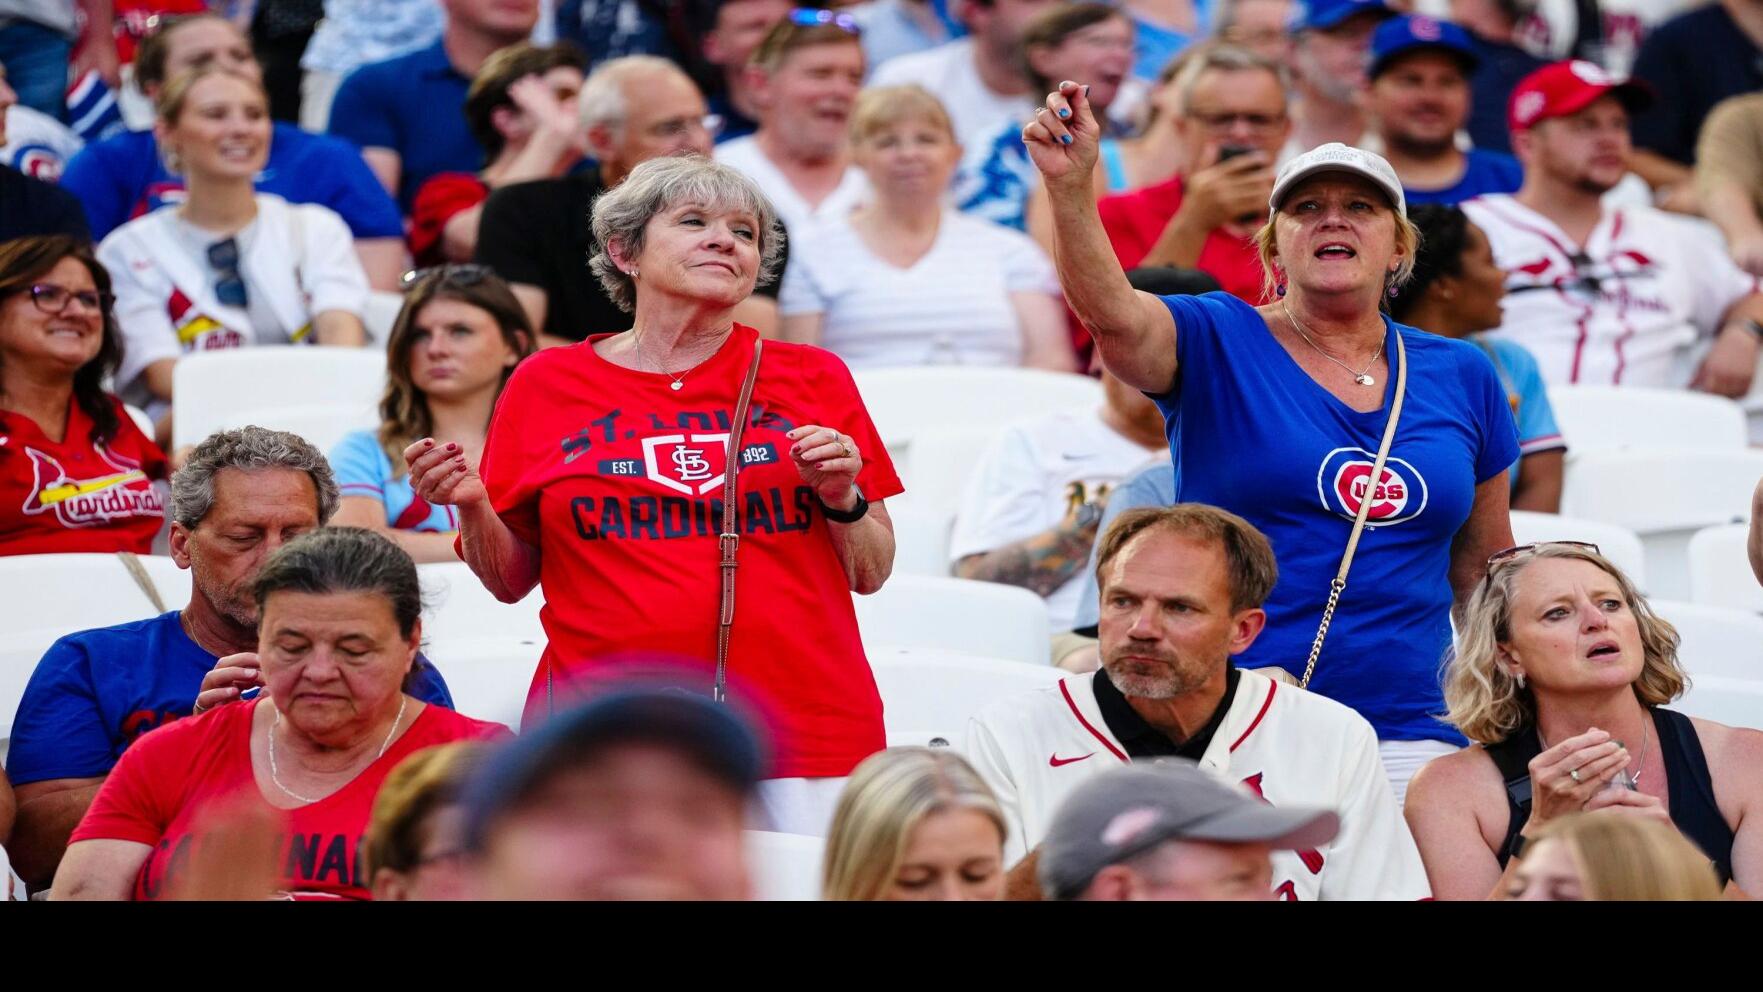 Cards vs. Sox: Who does a Chicago Cubs fan root for this week?